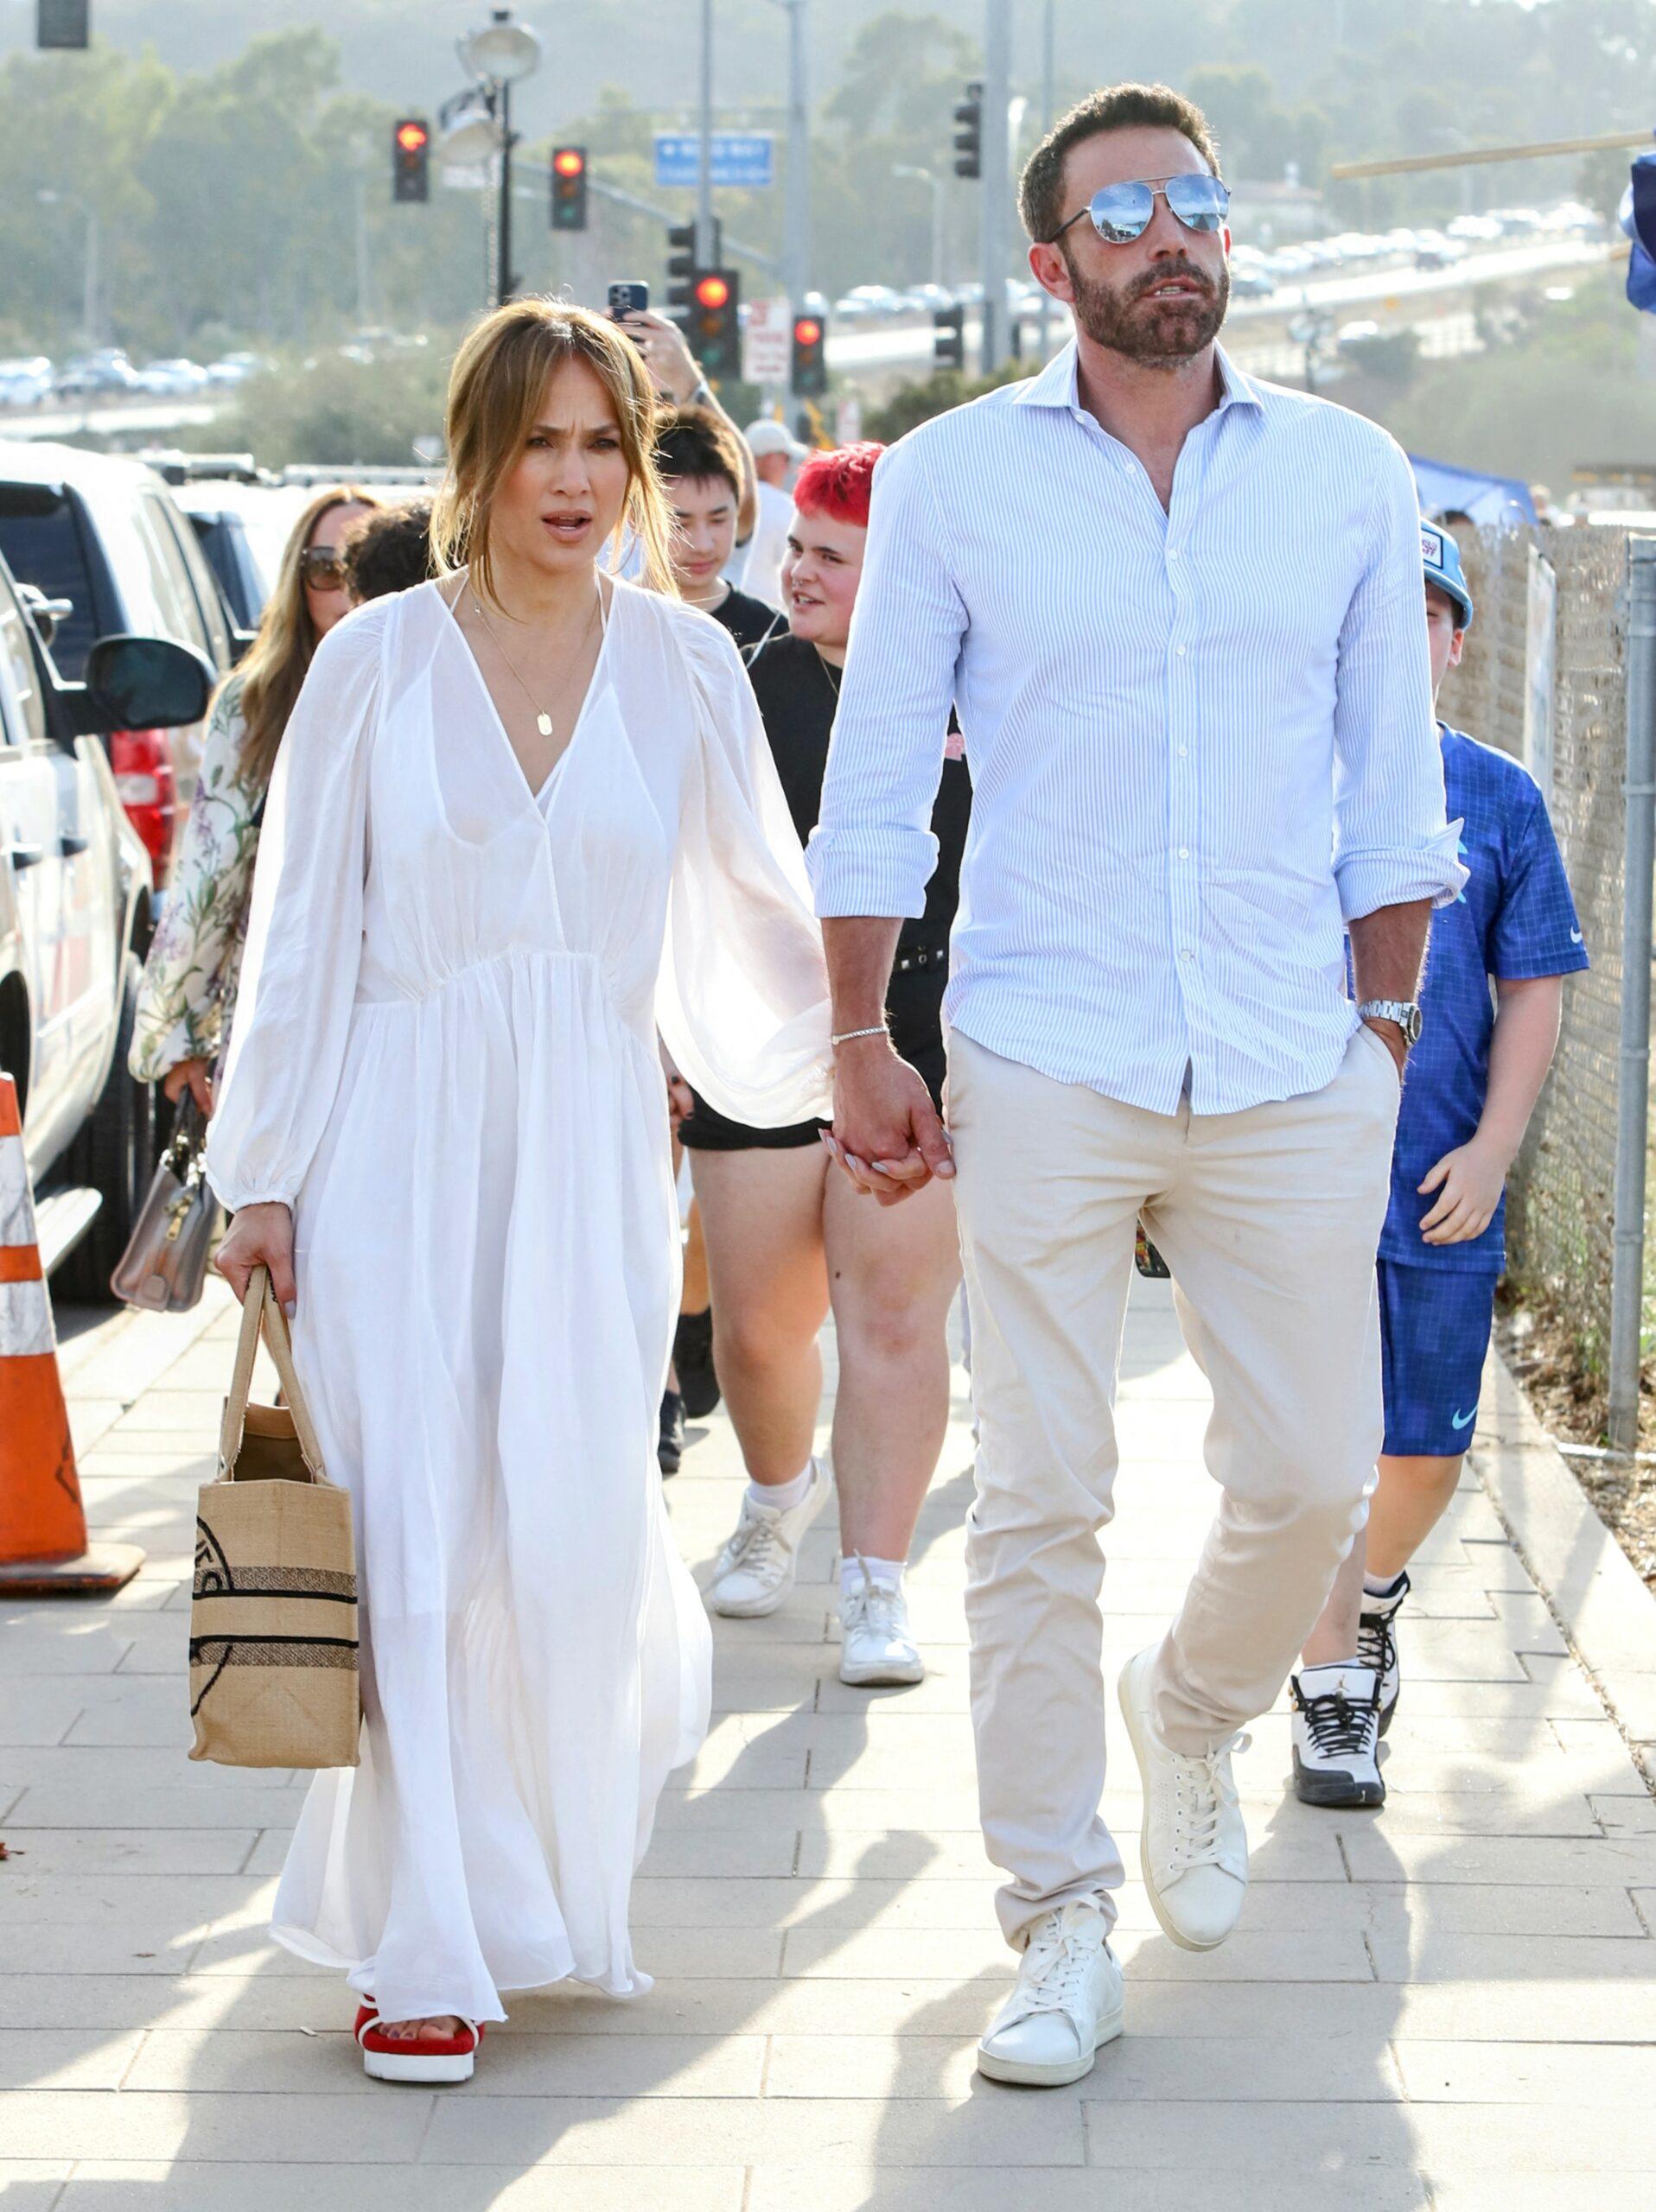 Ben Affleck and Jennifer Lopez braved the sweltering heat to attend the Malibu Chili Cook-Off in Malibu.